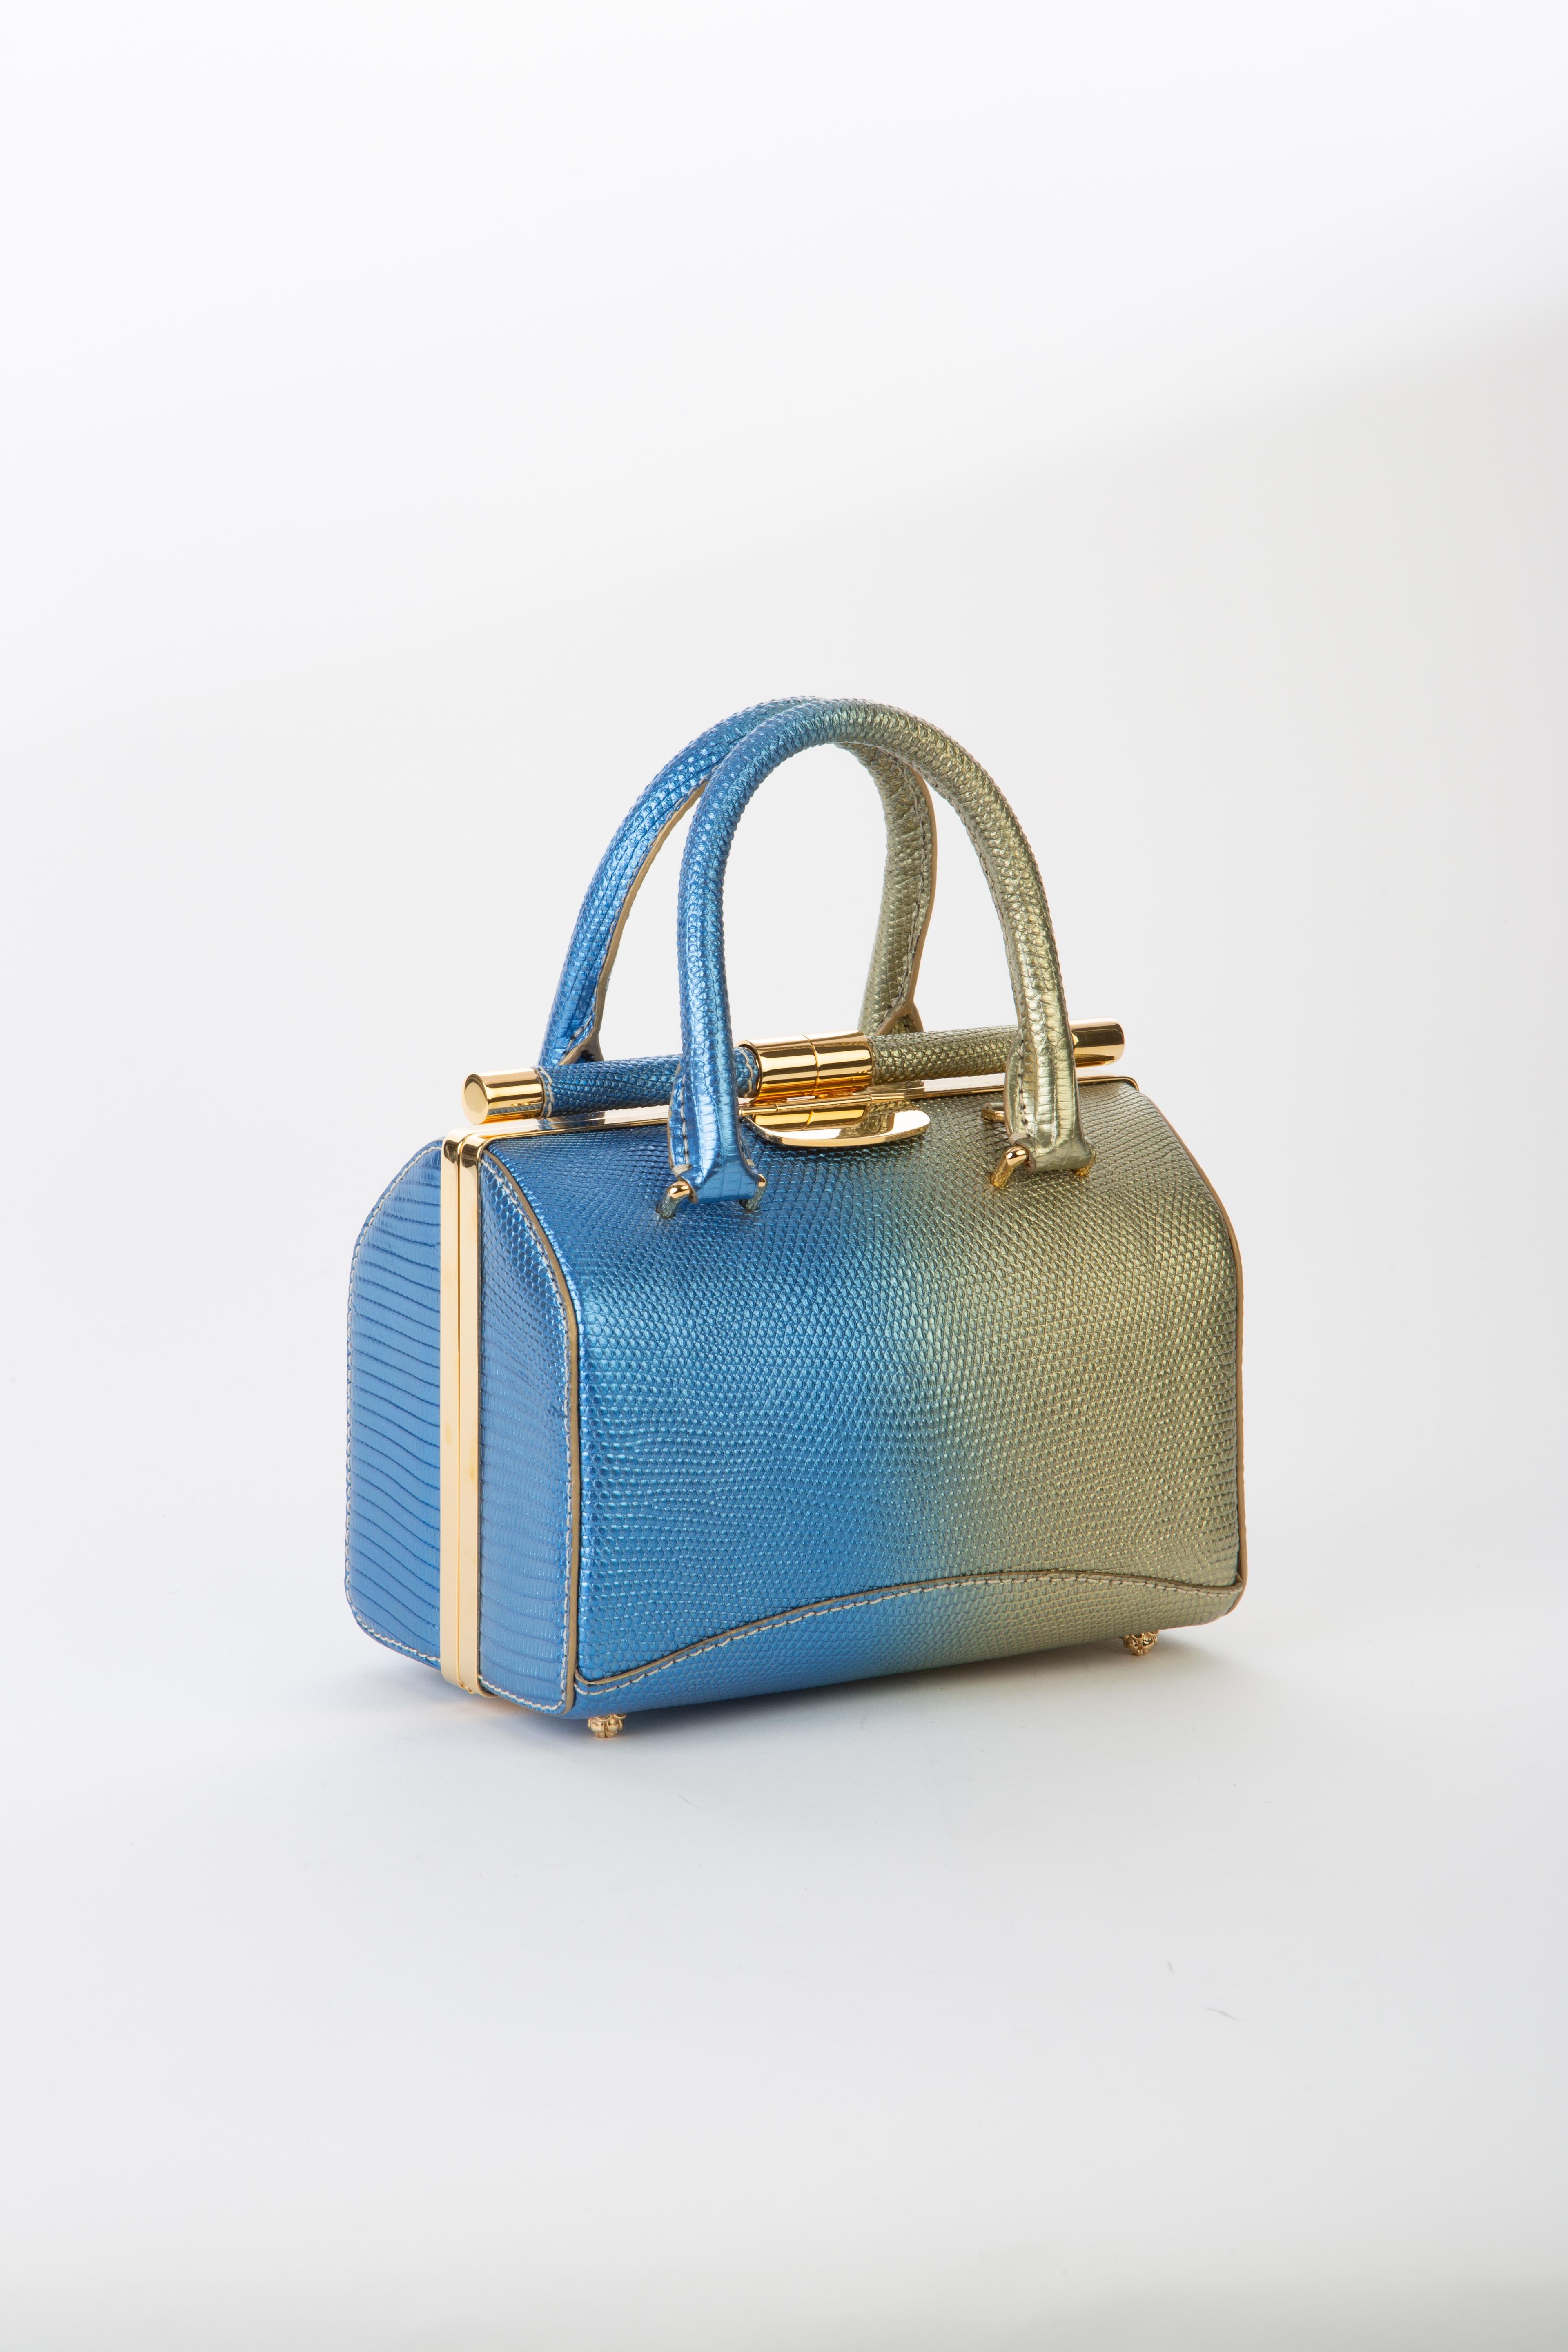 The Jamie Doctor is a double handle structured bag. It features our slide-lock closure, pinecone feet, interior pocket and our signature Thayer blue suede lining. 

Size: Small
Hardware: Gold
Interior/Lining: Suede
Dimensions: 7.5” W x 5.0” H x 4.0”